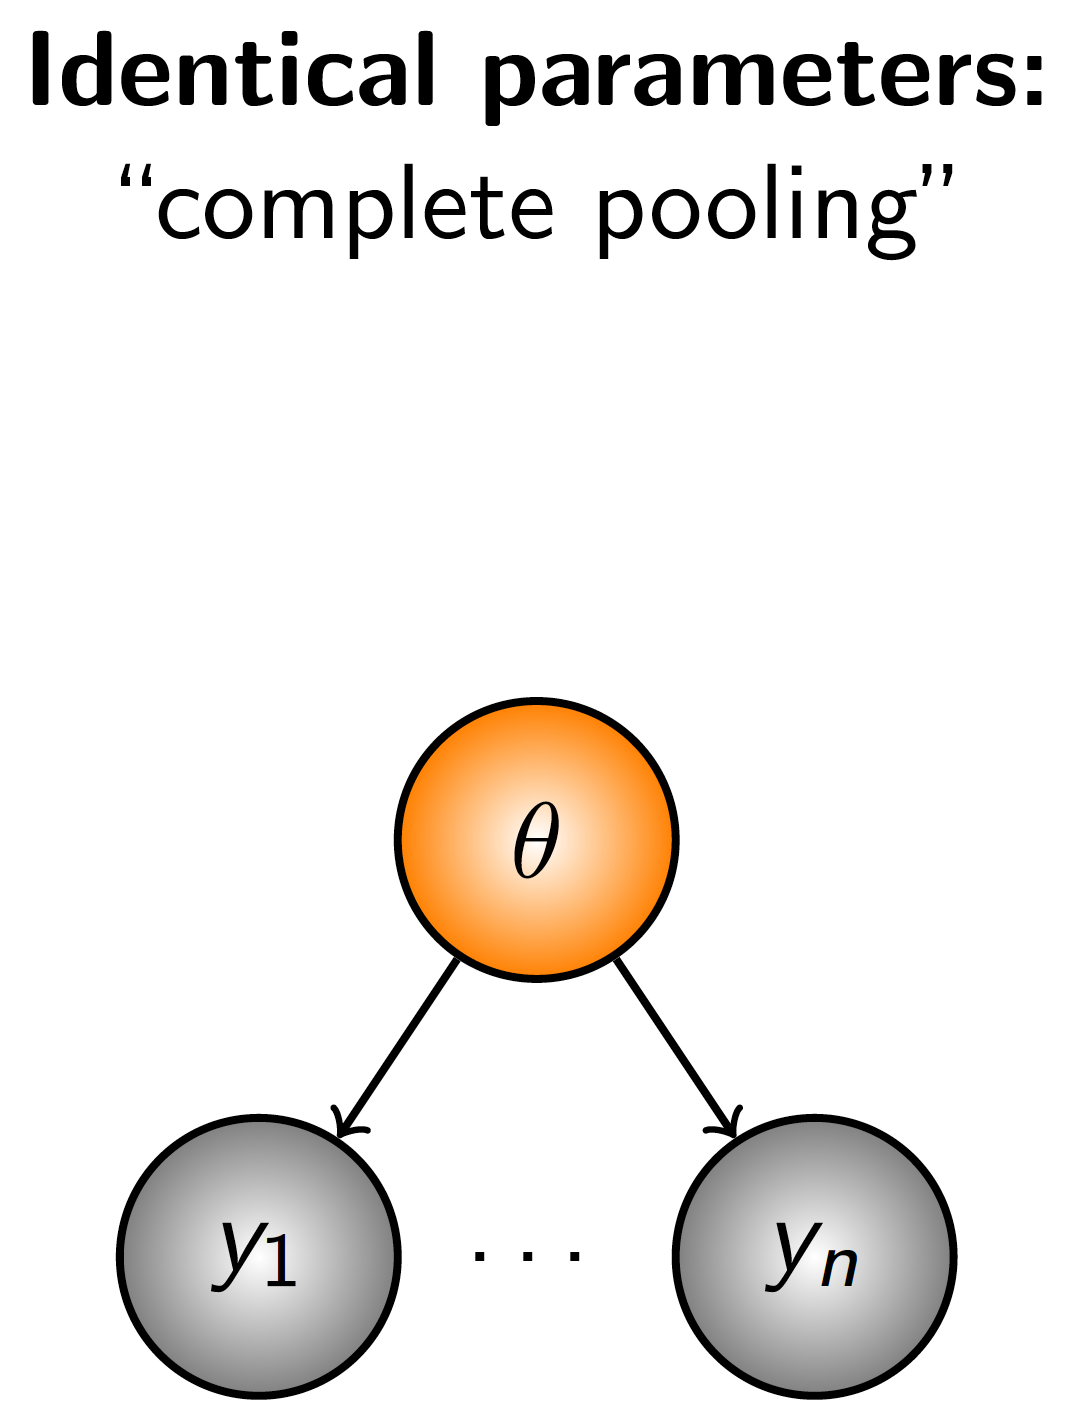 Diagrammatic representation complete pooling, a model structure in which all observations inform one parameter.